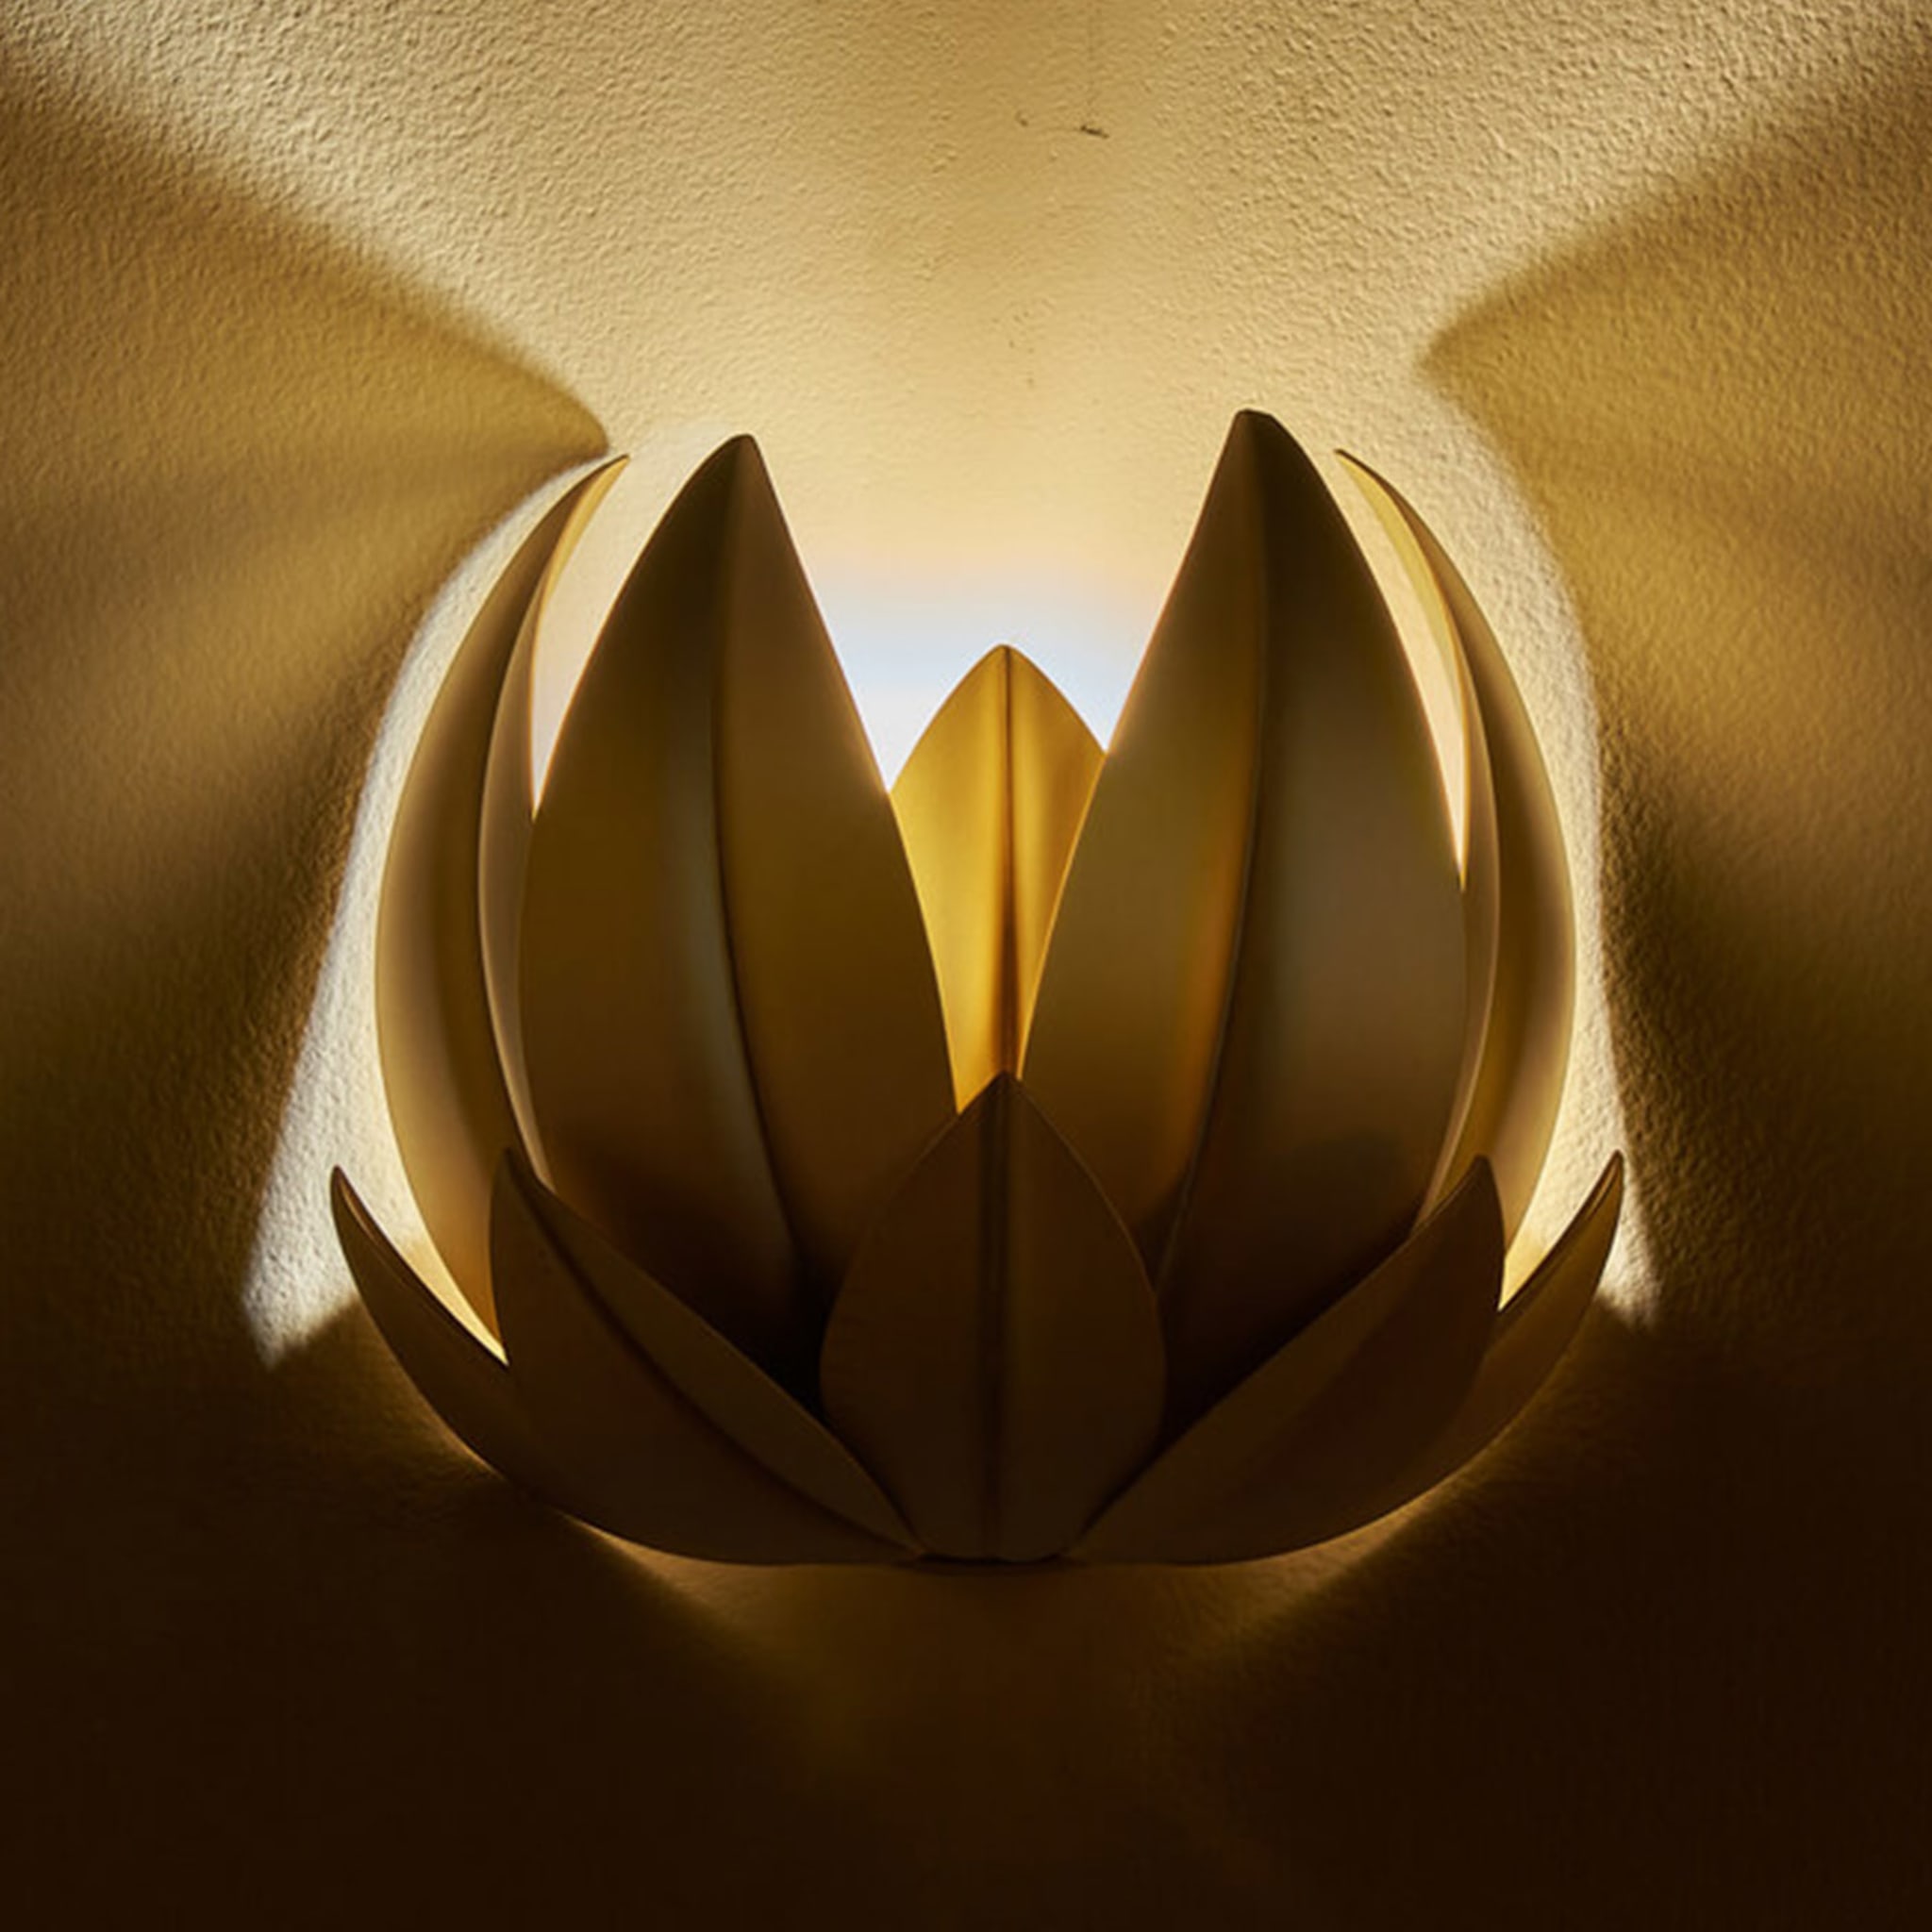 "Leaves" Wall Sconce in Satin Brass by Droulers Architecture - Alternative view 3